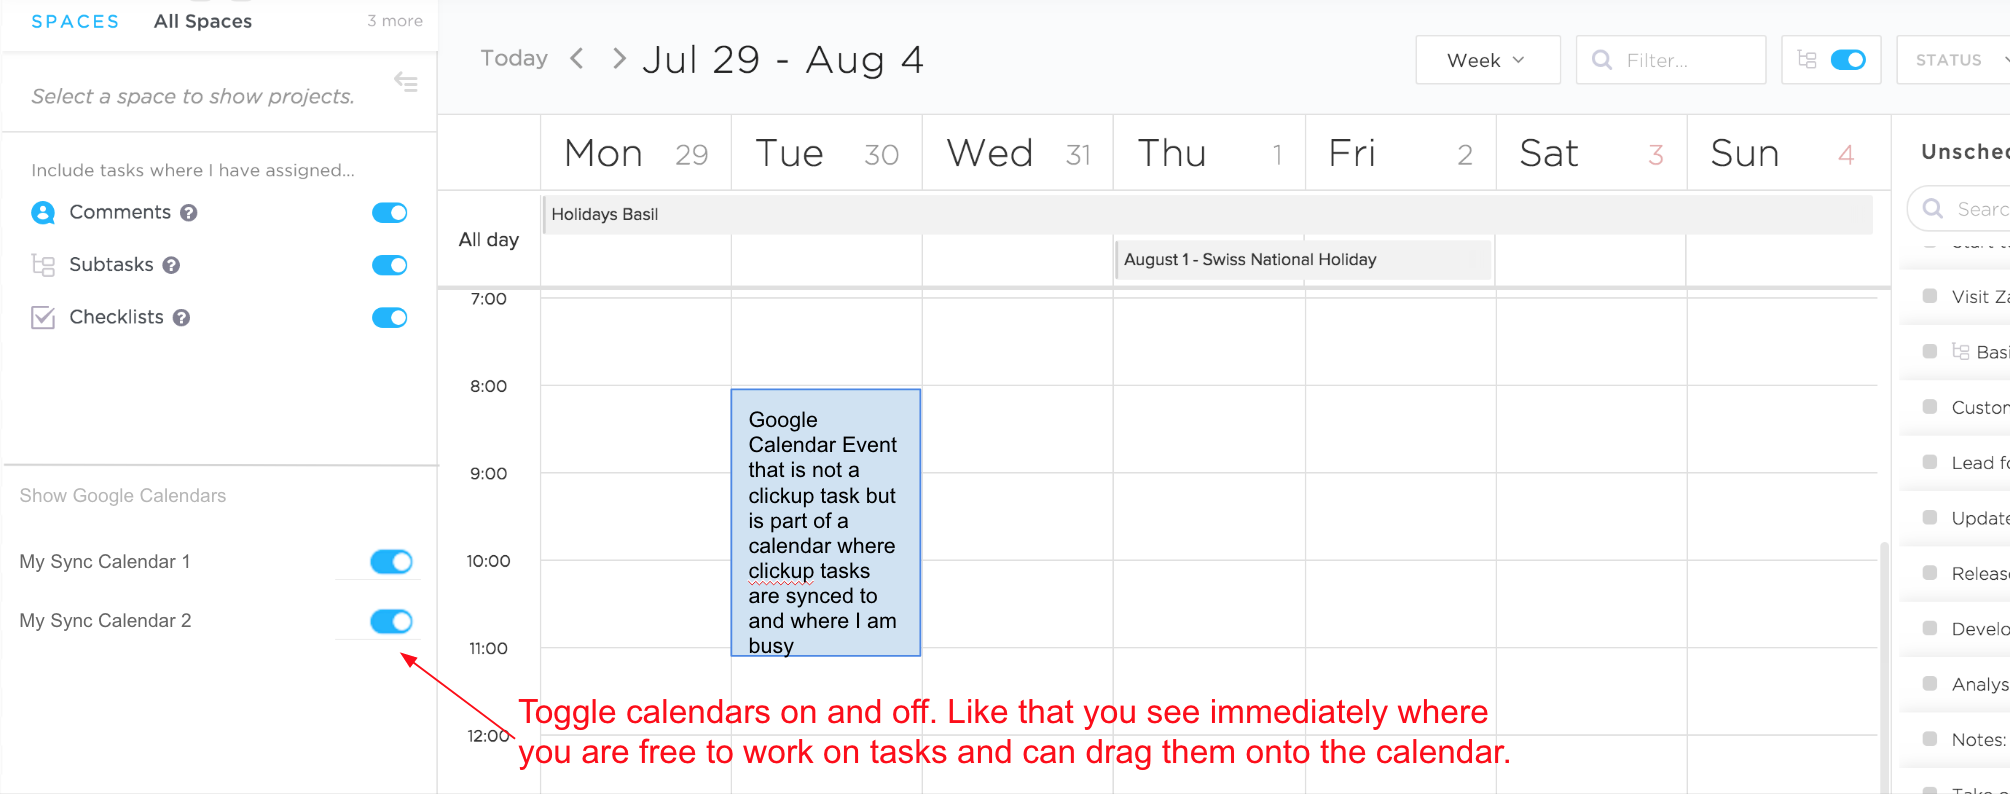 Overlay Google Calendars in Time View Feature Requests ClickUp